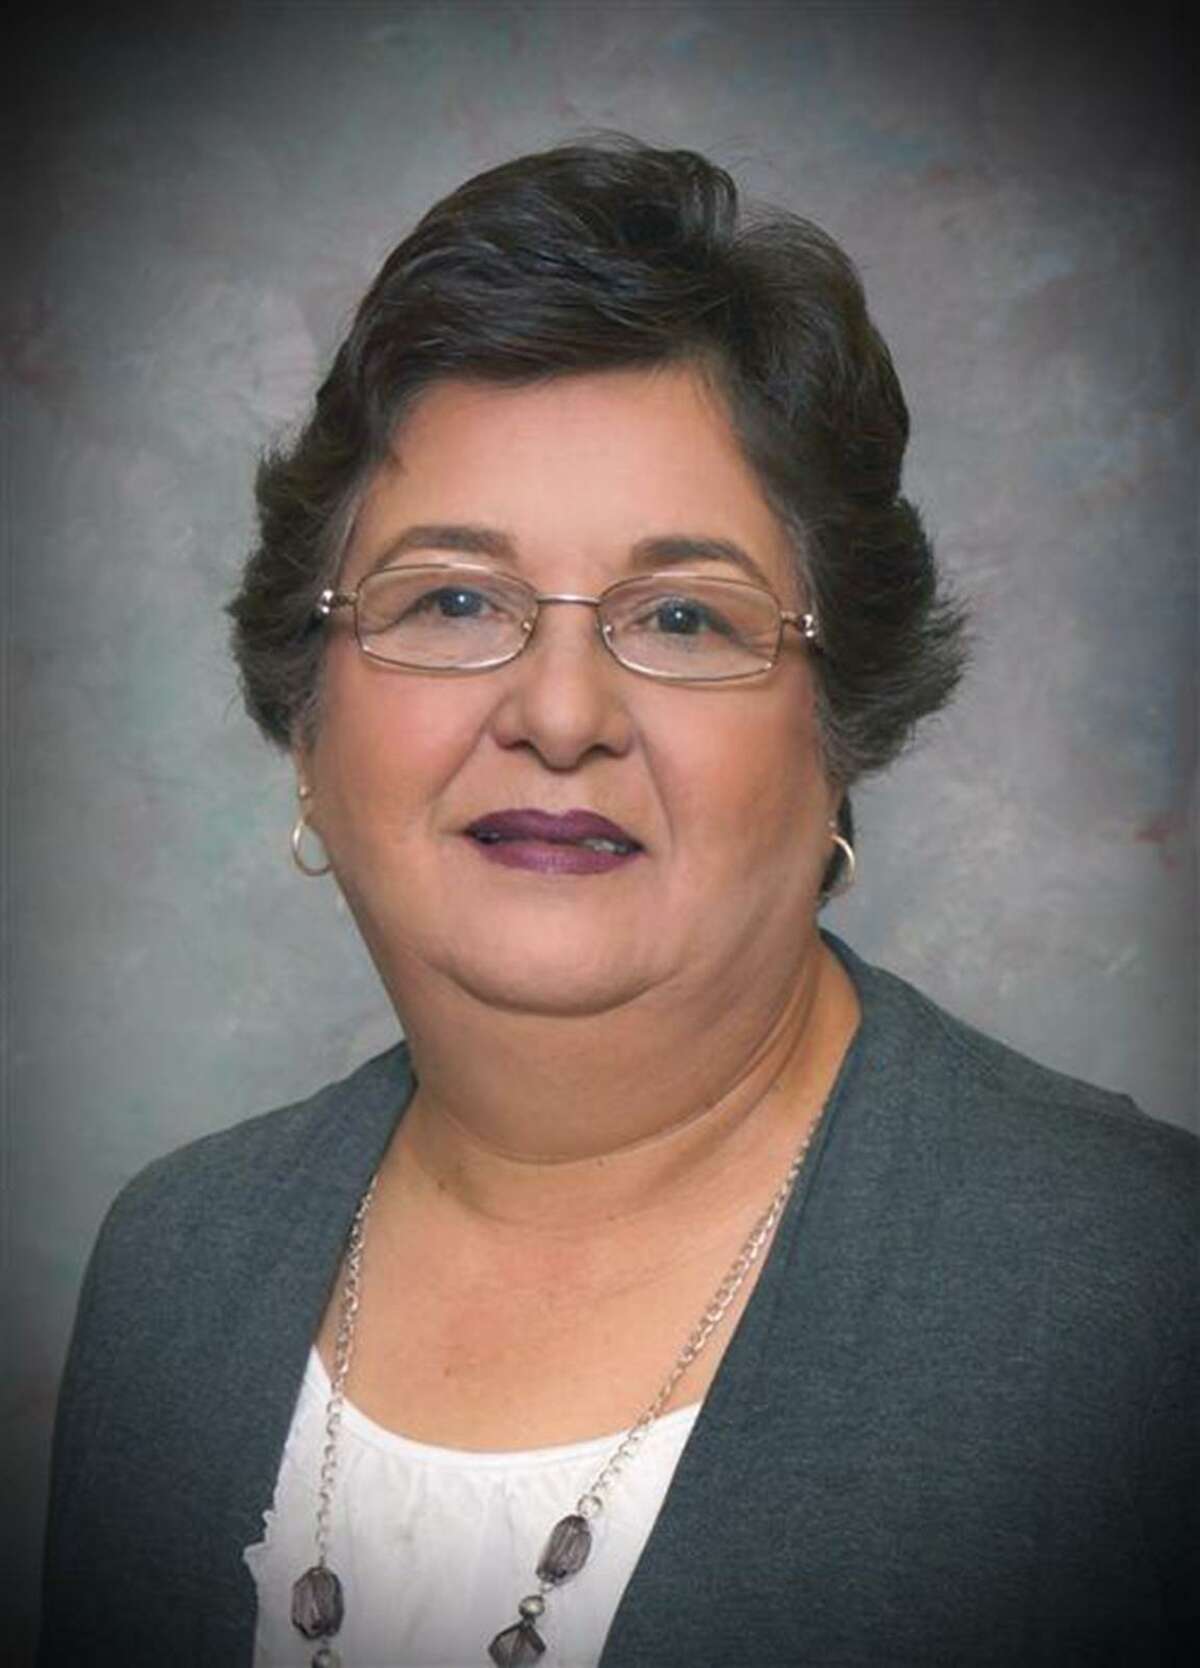 South San ISD trustee Linda Longoria has resigned from the board after less than a year of a four-year term. Her resignation letter to board President Angelina Osteguin, sent Tuesday, gave no reason, one official said. The South San board remains under the supervision of a state-appointed conservator.